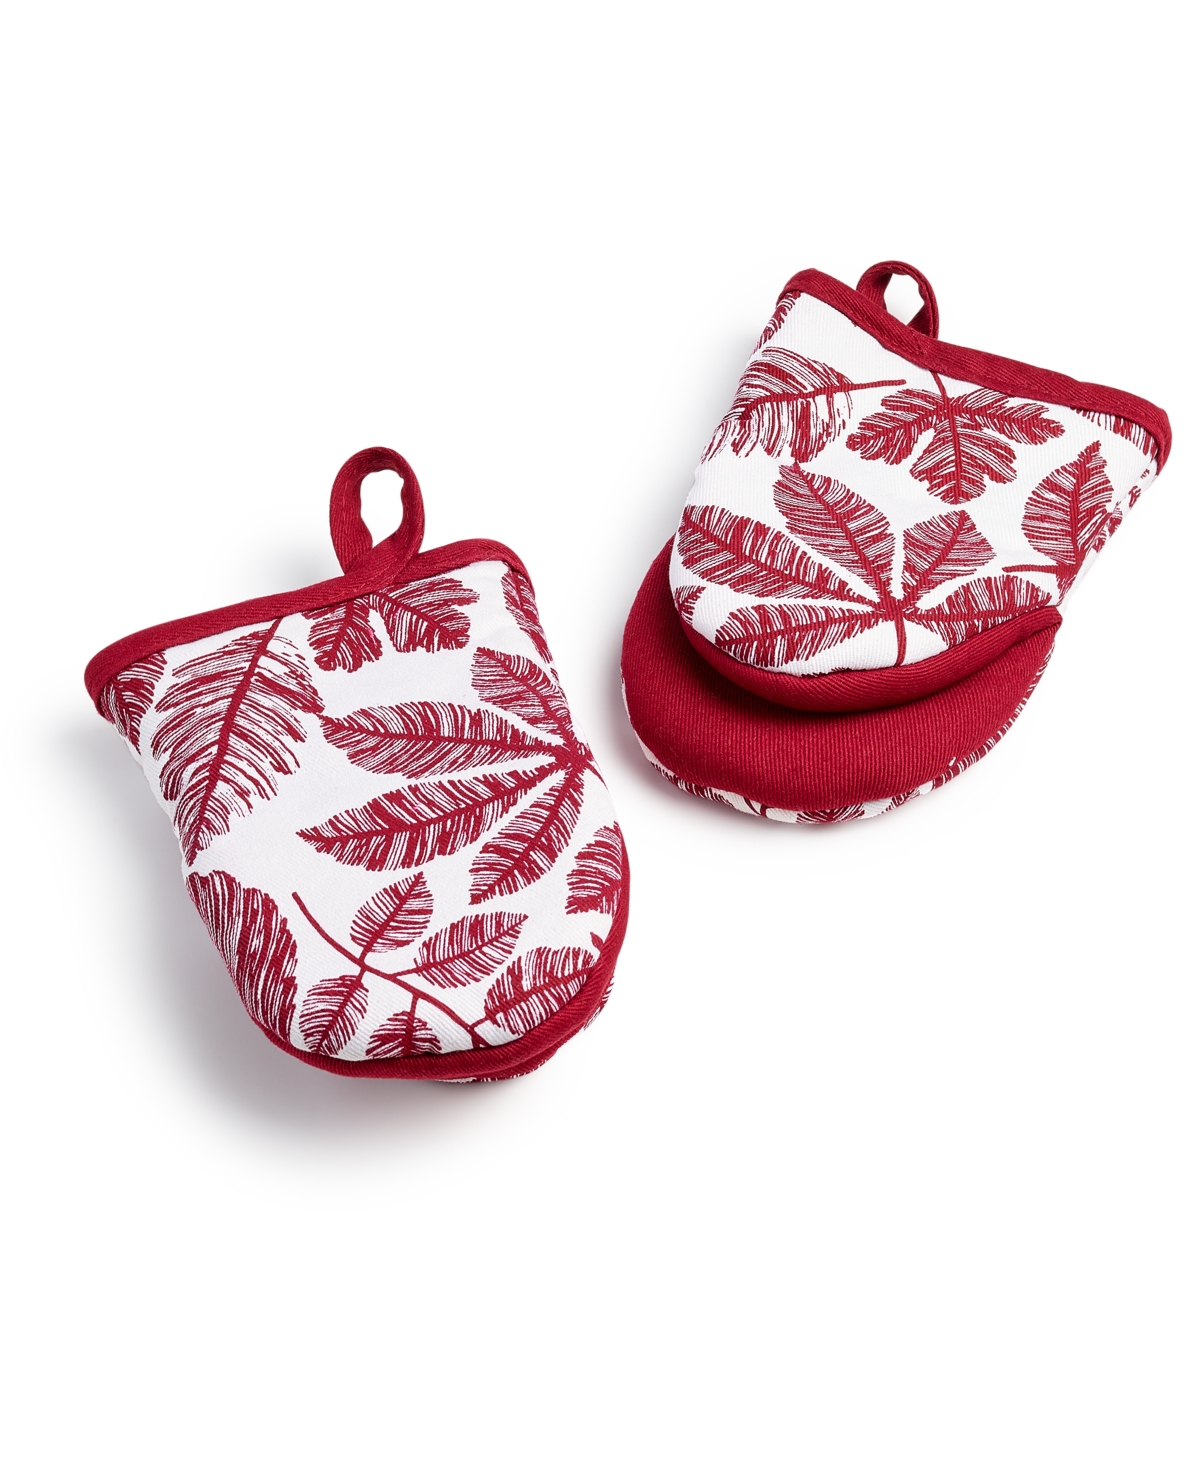 Harvest 2-Pc. Leaf-Print Mini Oven Mitts, Created for Macy's